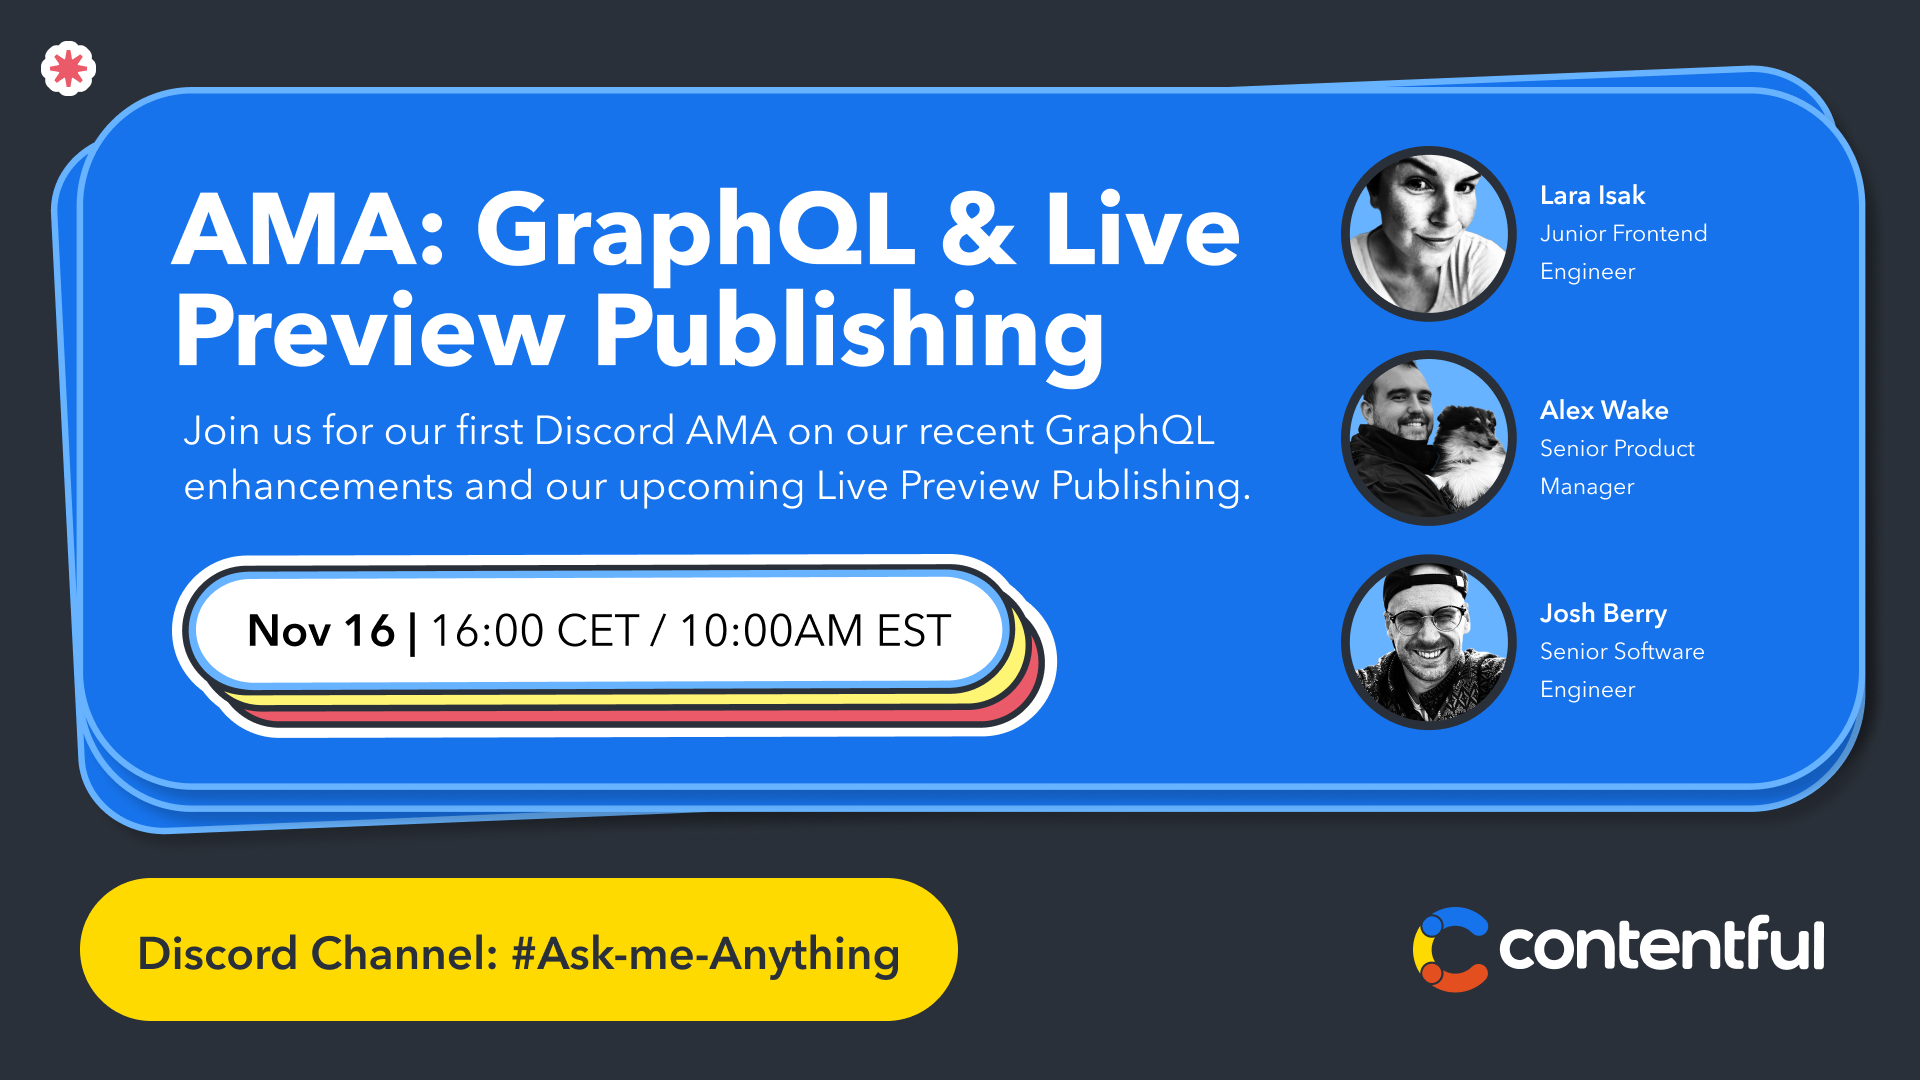 Contentful Developer Community: GraphQL and live preview publishing in our first Discord AMA